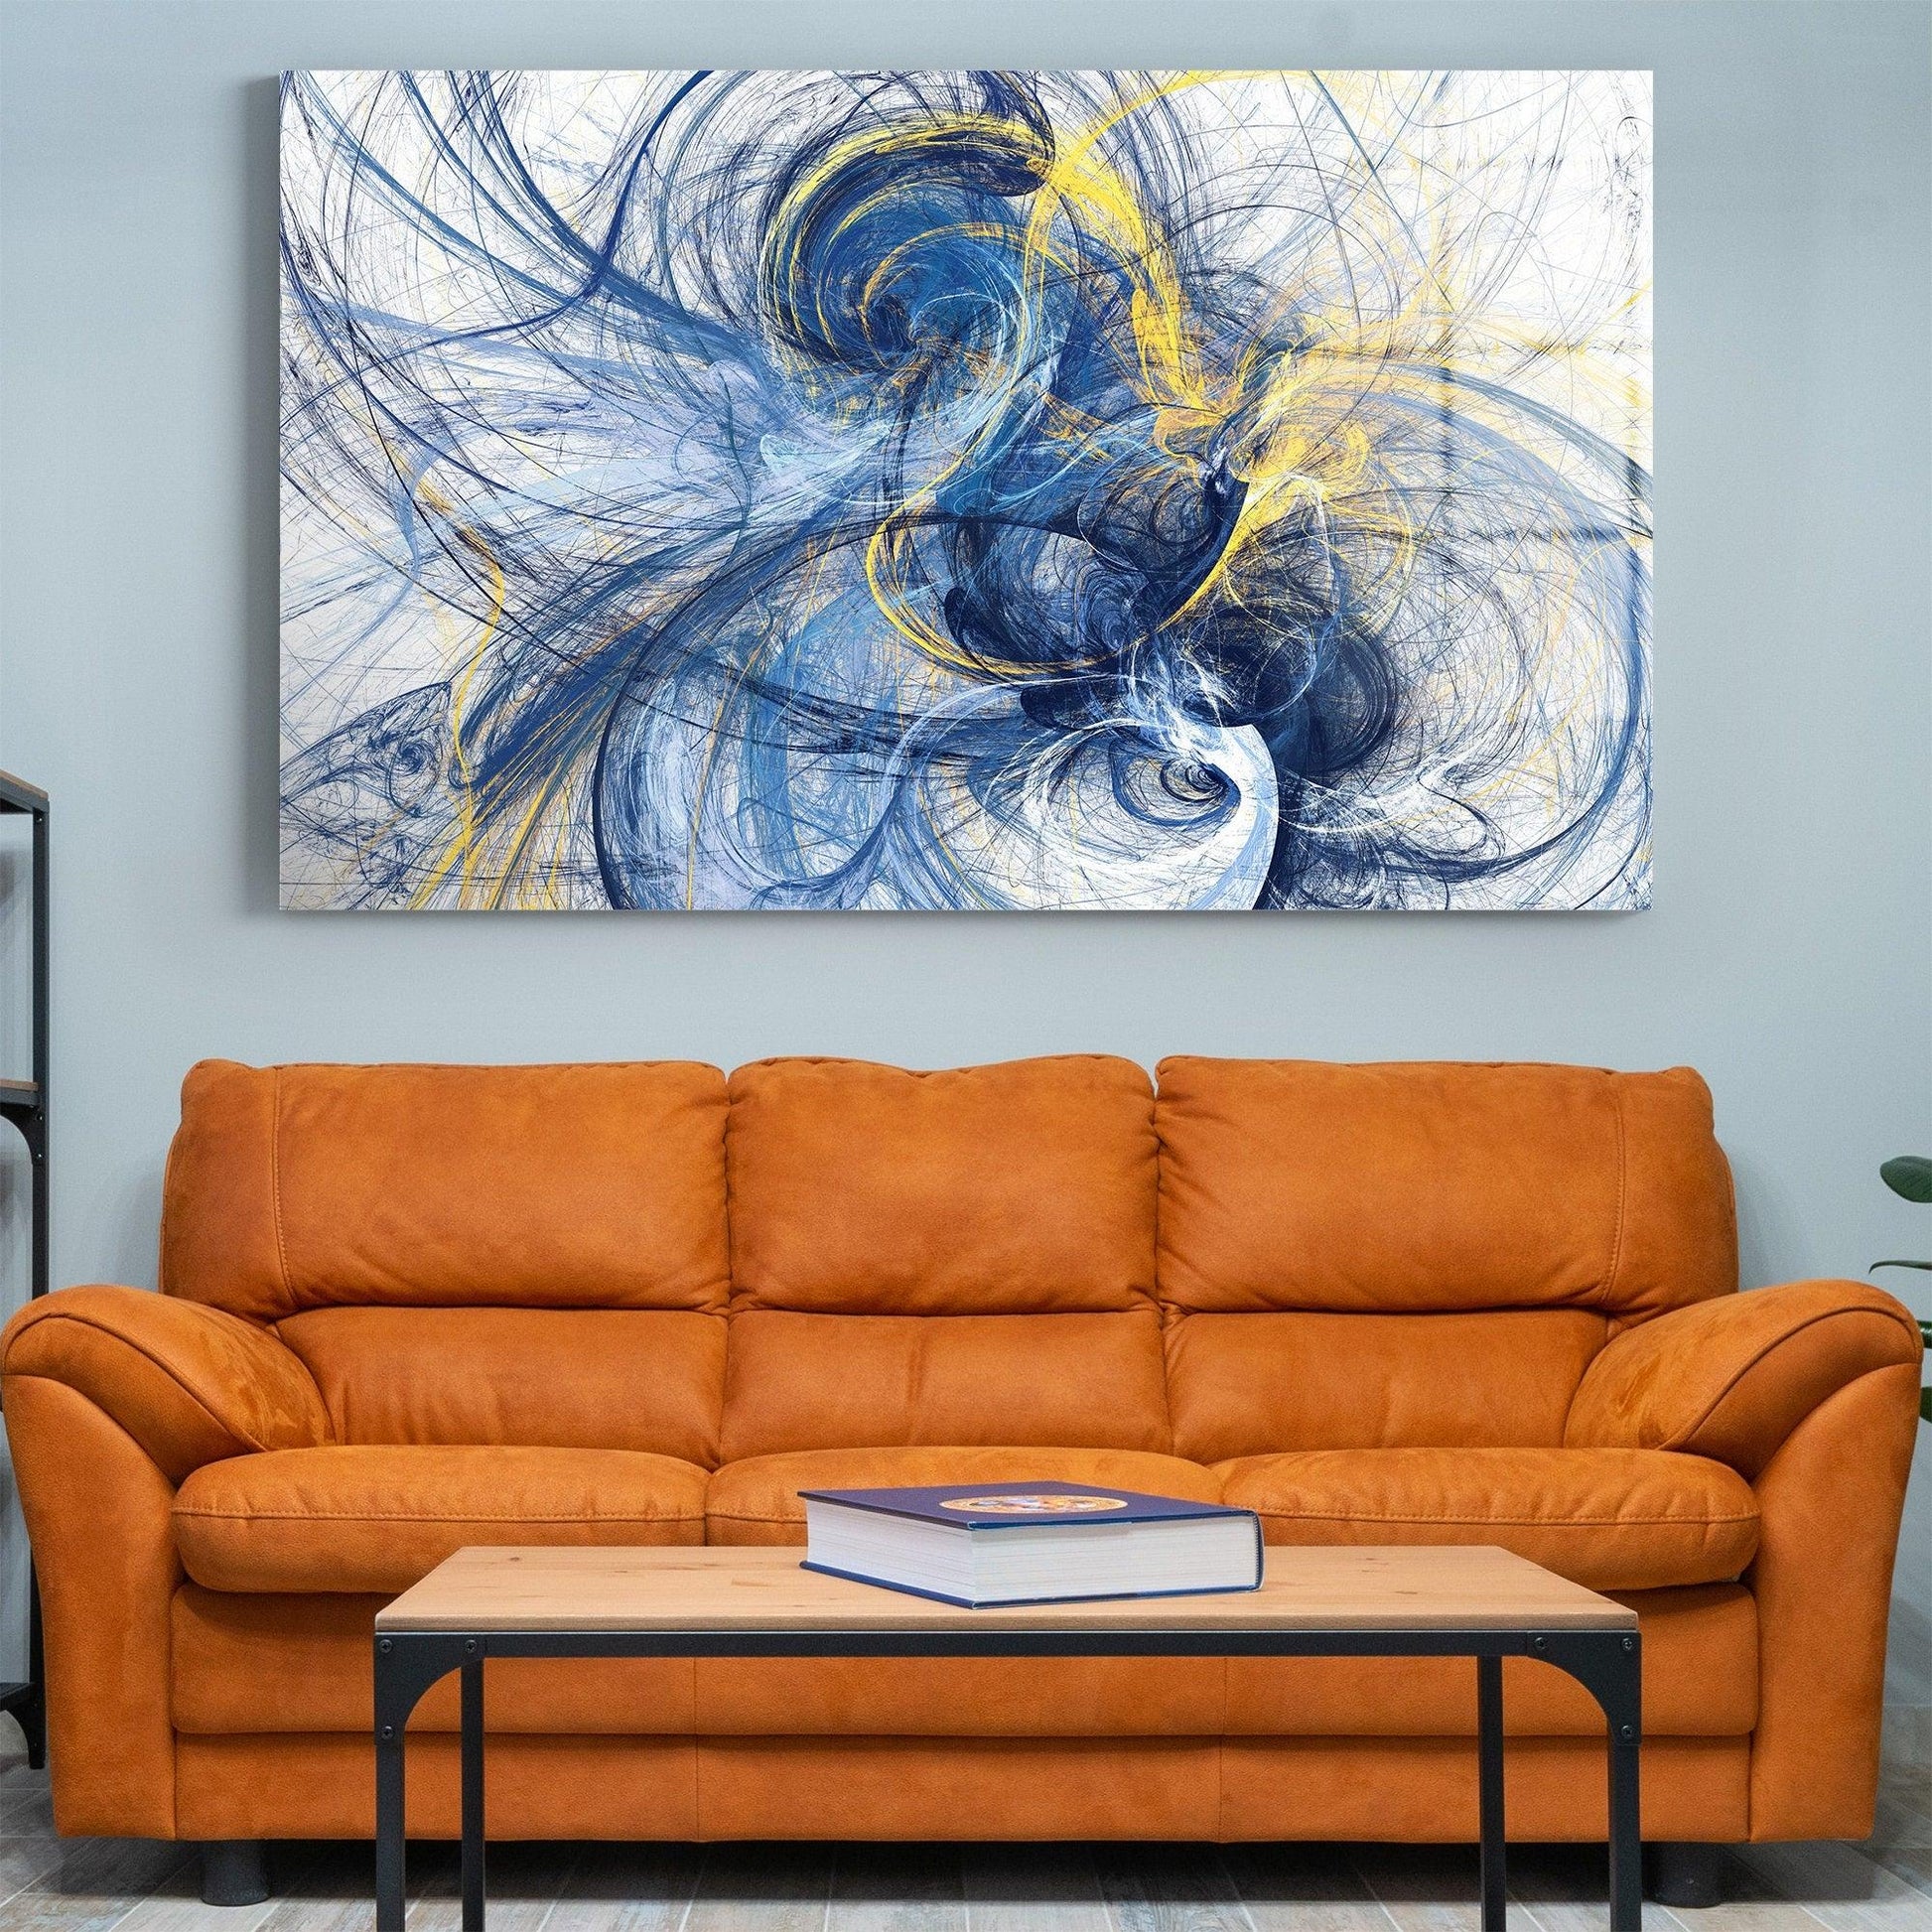 Abstract blue bright glass wall art| blue wall art, blue and yellow wall art, personalized gifts for dad, Living room decor, canvas wall art